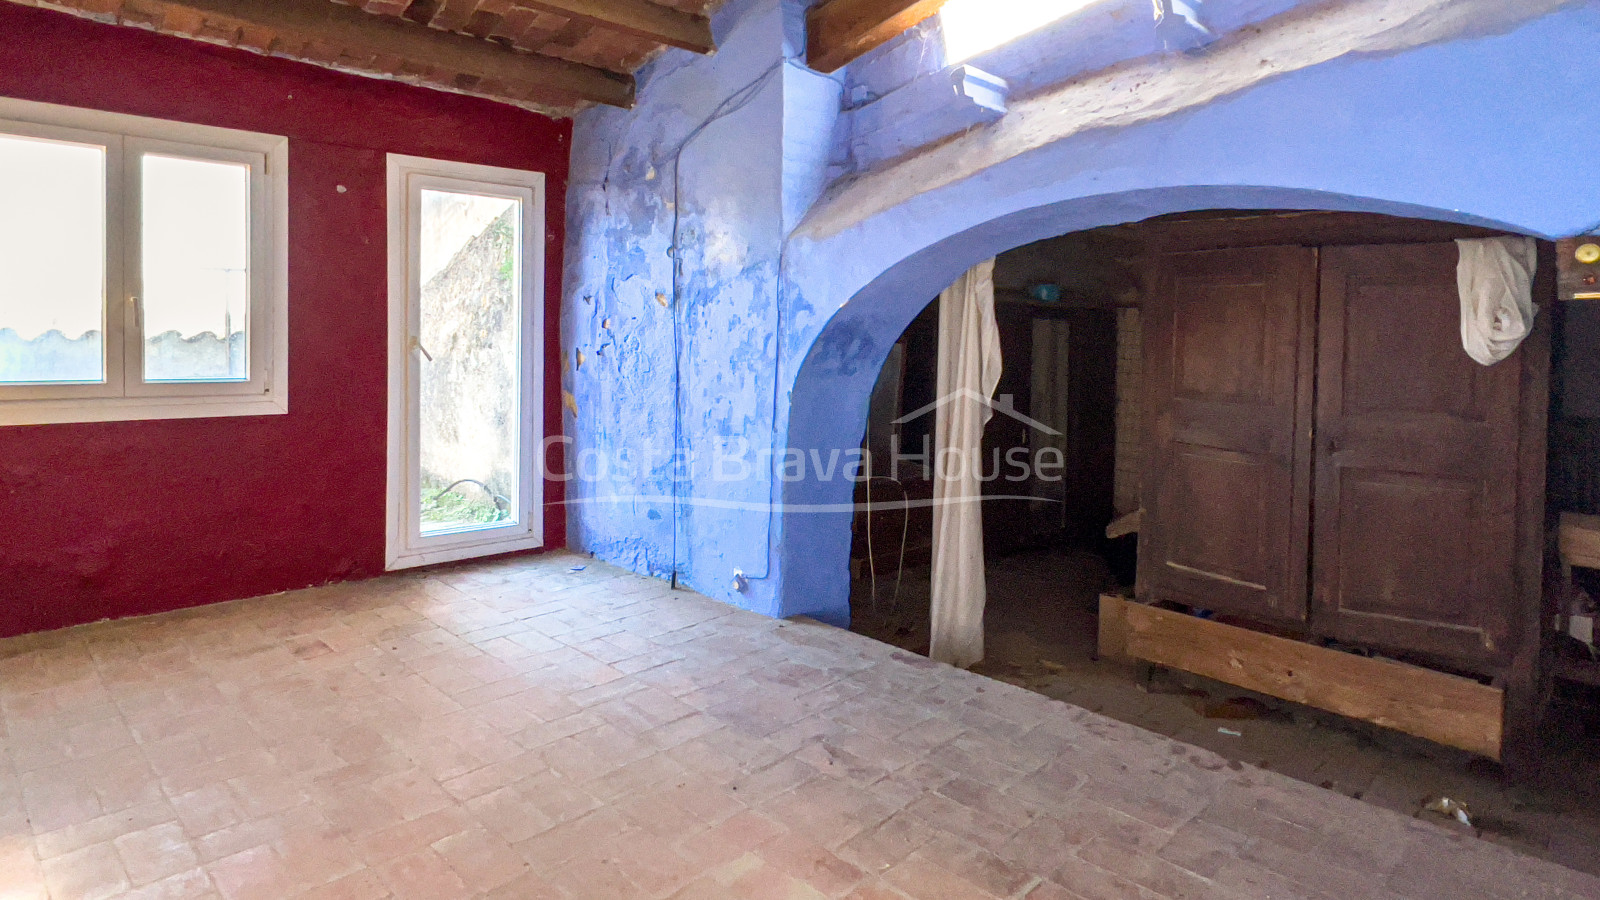 Stone house for sale in Gualta, with interior courtyard and many possibilities for renovation